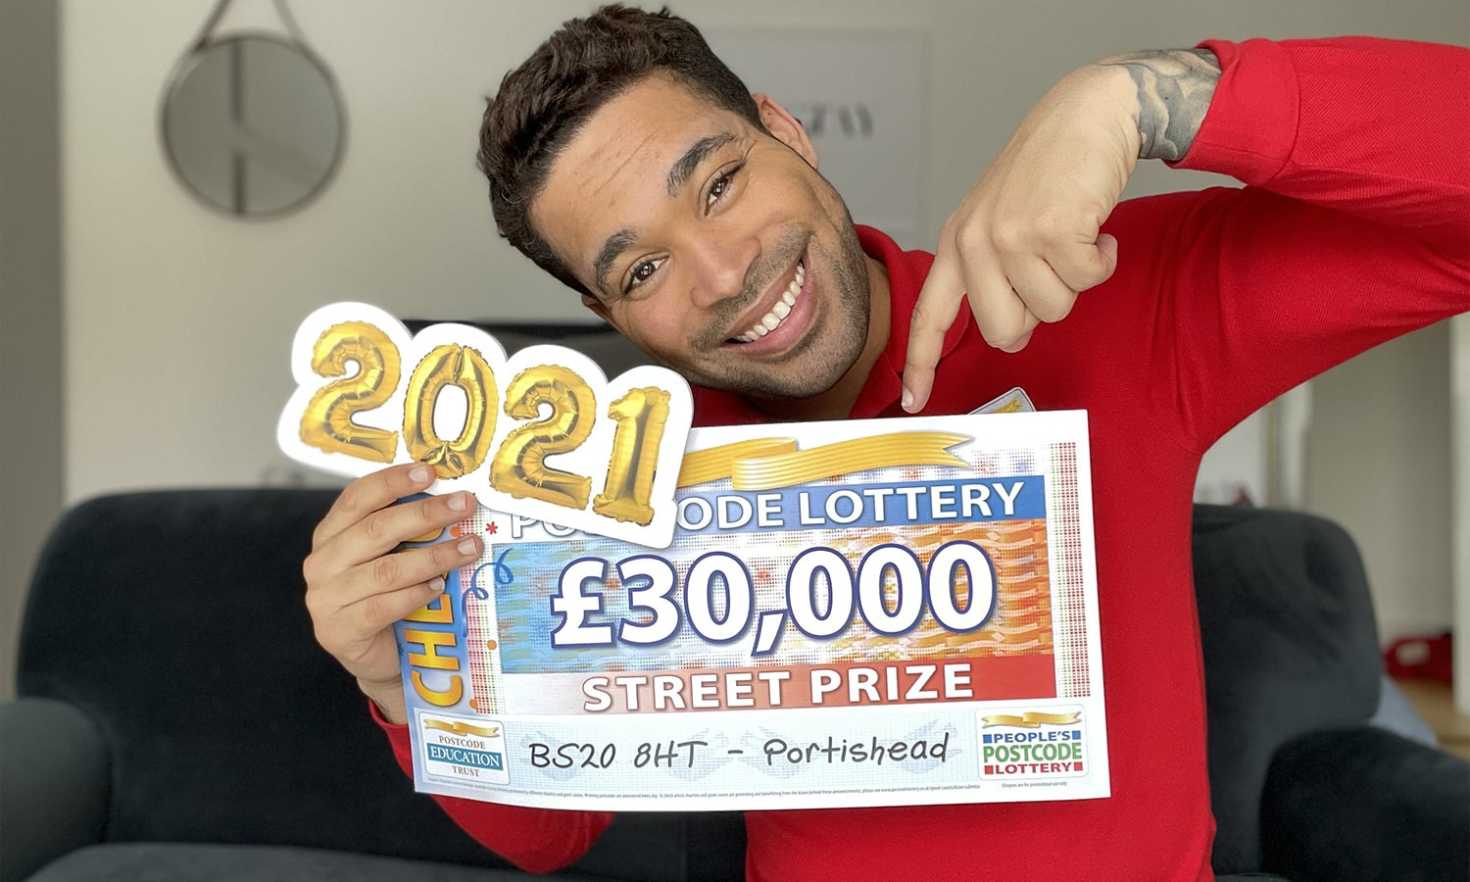 Danyl has a fantastic £30,000 Street Prize for each of our five lucky winners in Portishead